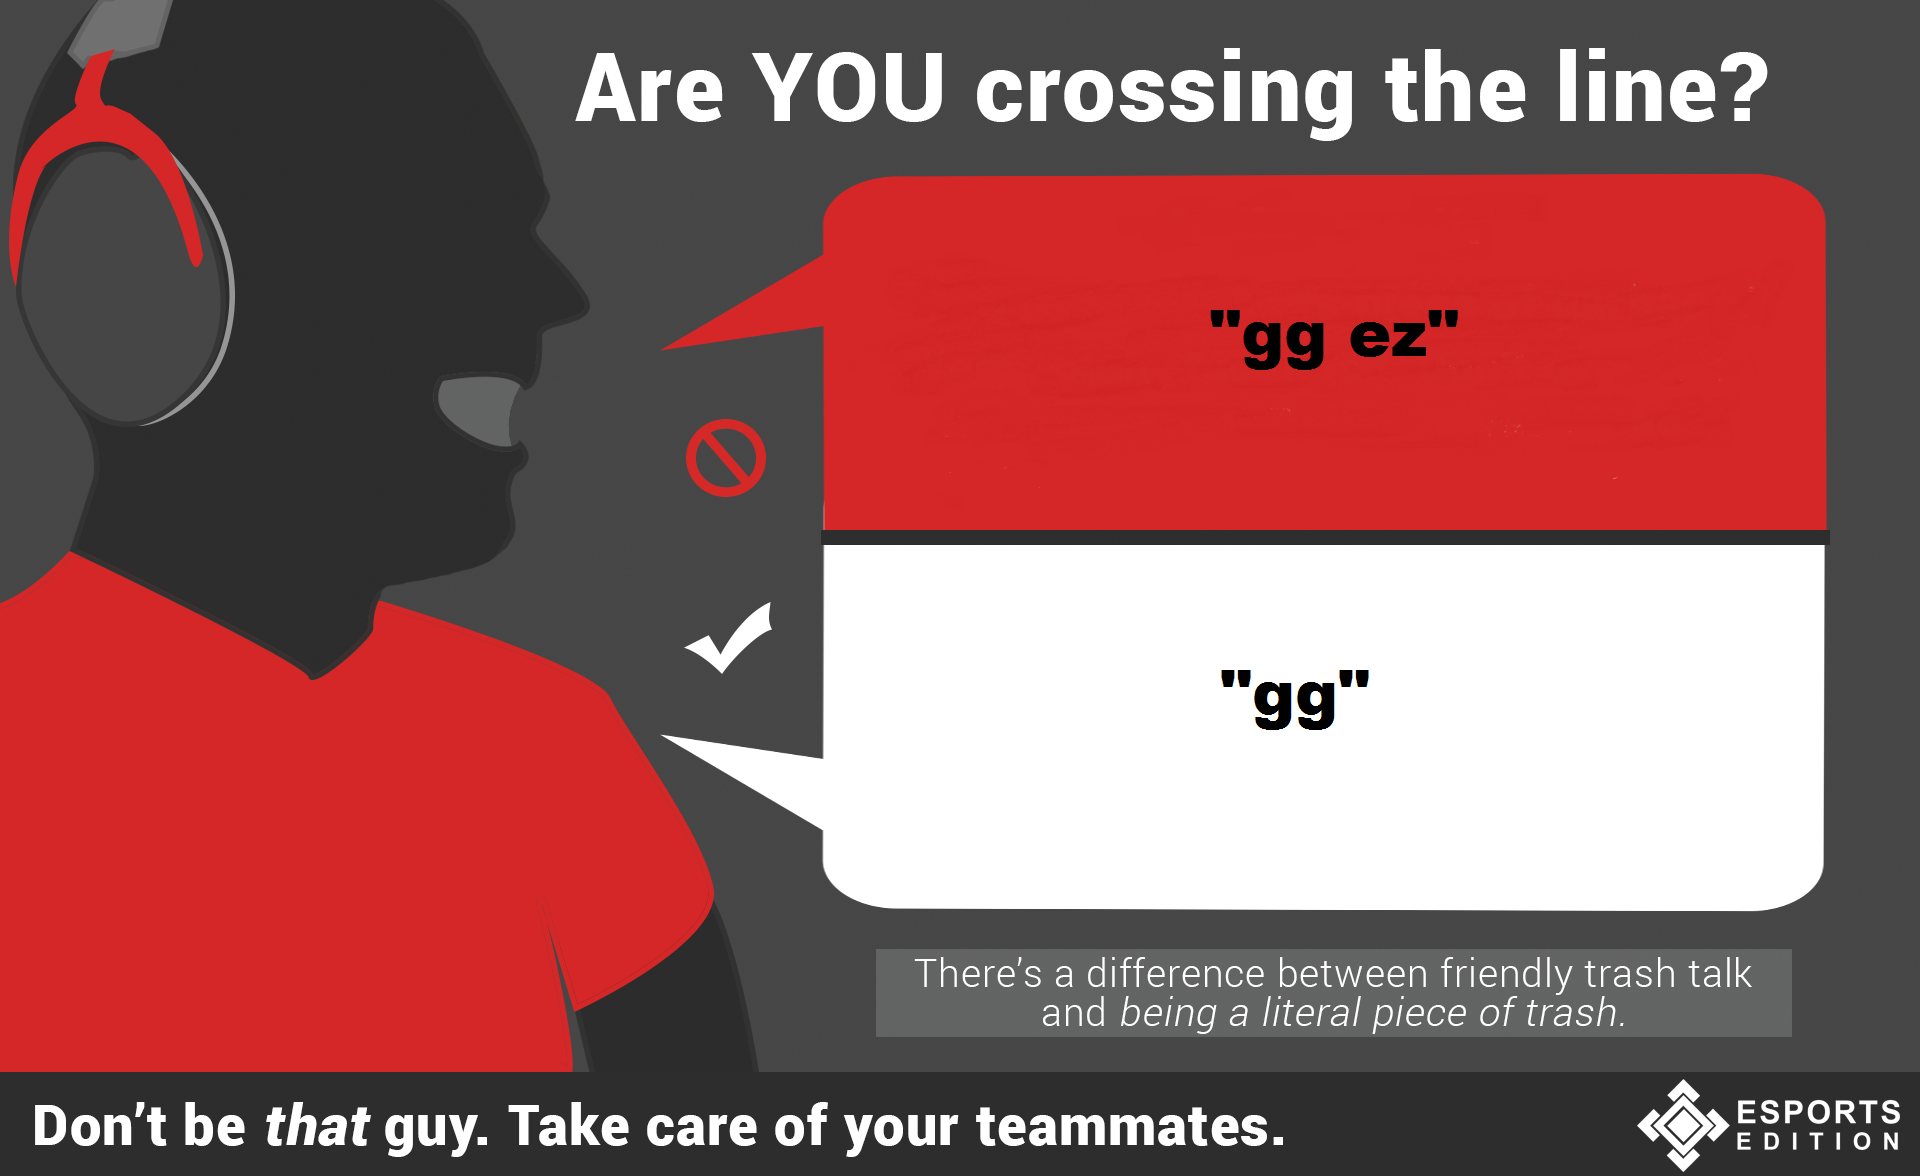 gg ez meaning - Are You crossing the line? "gg ez" "gg" There's a difference between friendly trash talk and being a literal piece of trash. Don't be that guy. Take care of your teammates.  Esports Edition